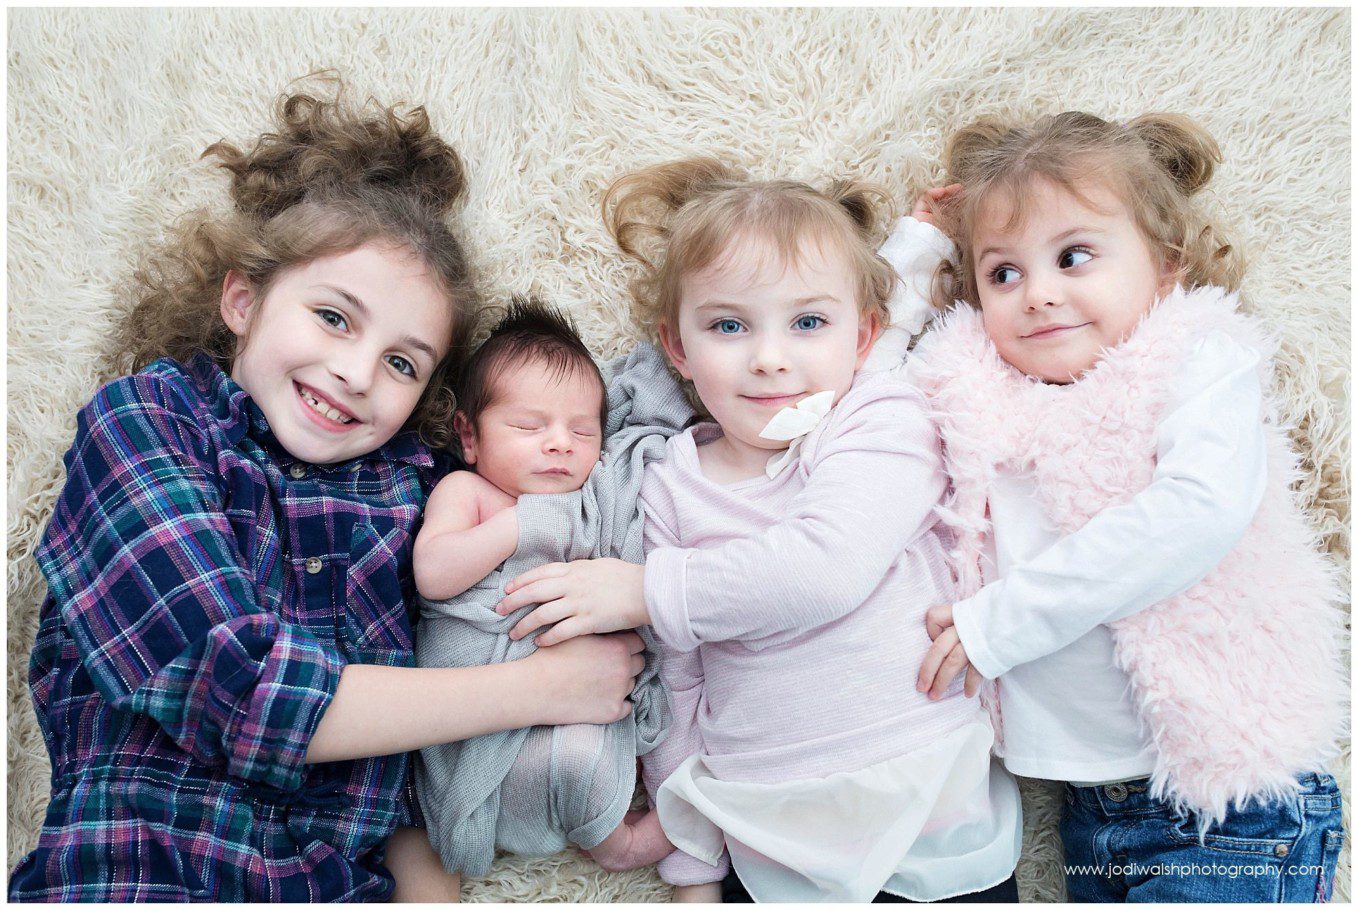 image of three sisters snuggling with their baby brother on a cream fur blanket. The baby is sleeping. The two sisters next to the baby are smiling at the camera. The remaining sister is looking off to the side.